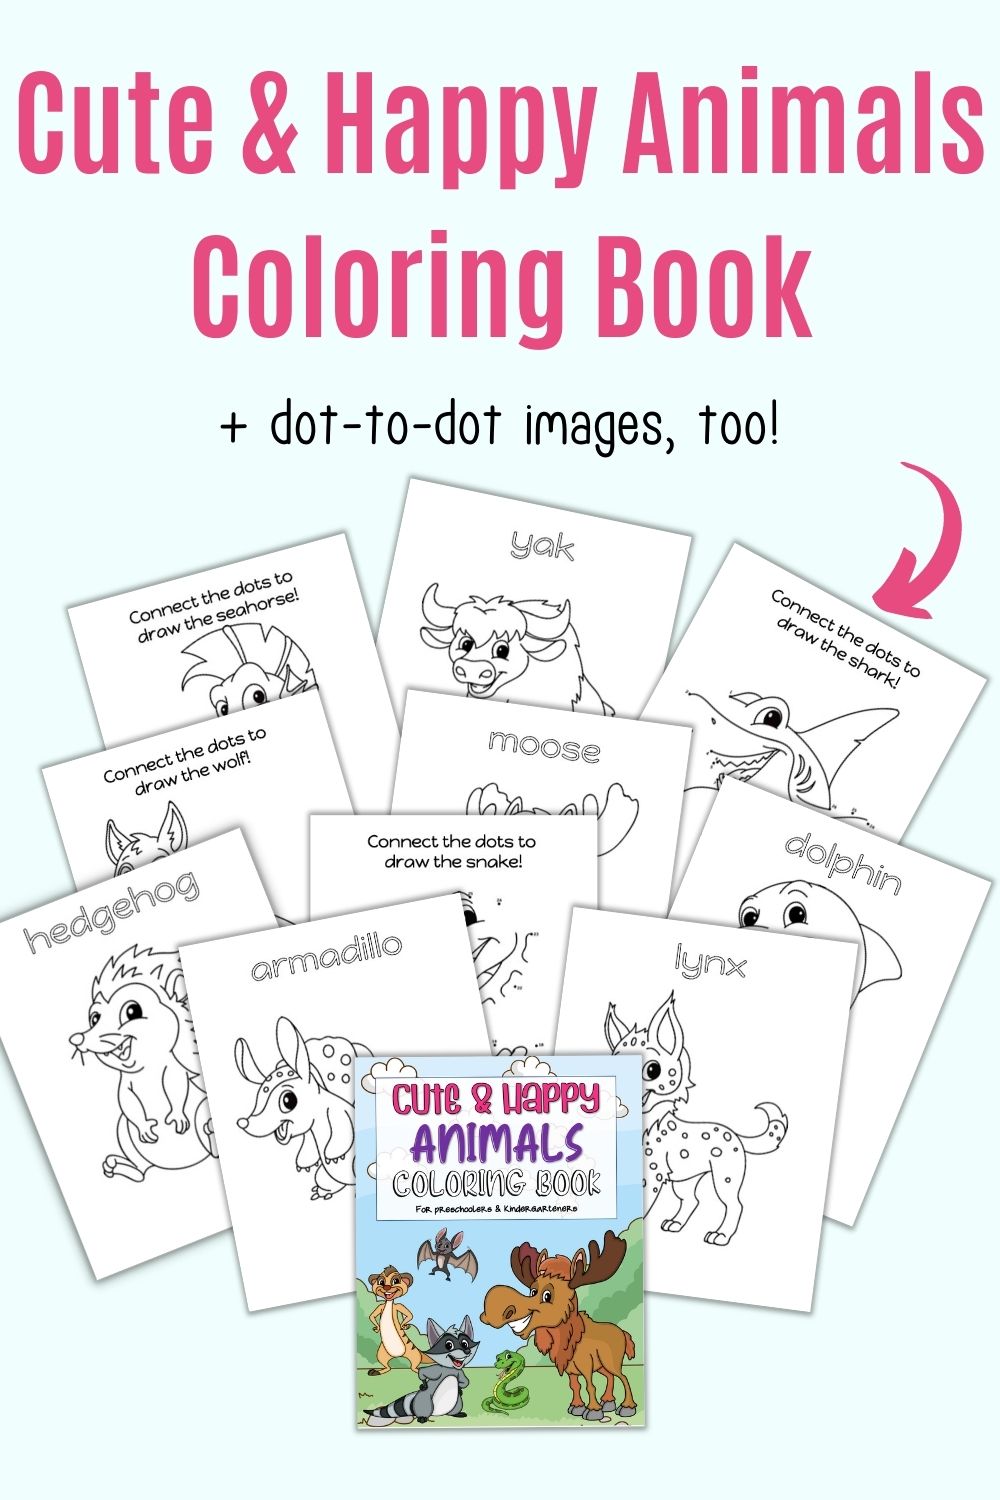 Text "cute & happy animals coloring book + dot-to-dot images, too!" with a preview of pages from a cute animal coloring book for kids. Animals include an armadillo, lynx, hedgehog, seahorse, yak, moose, shark, dolphin, and snake